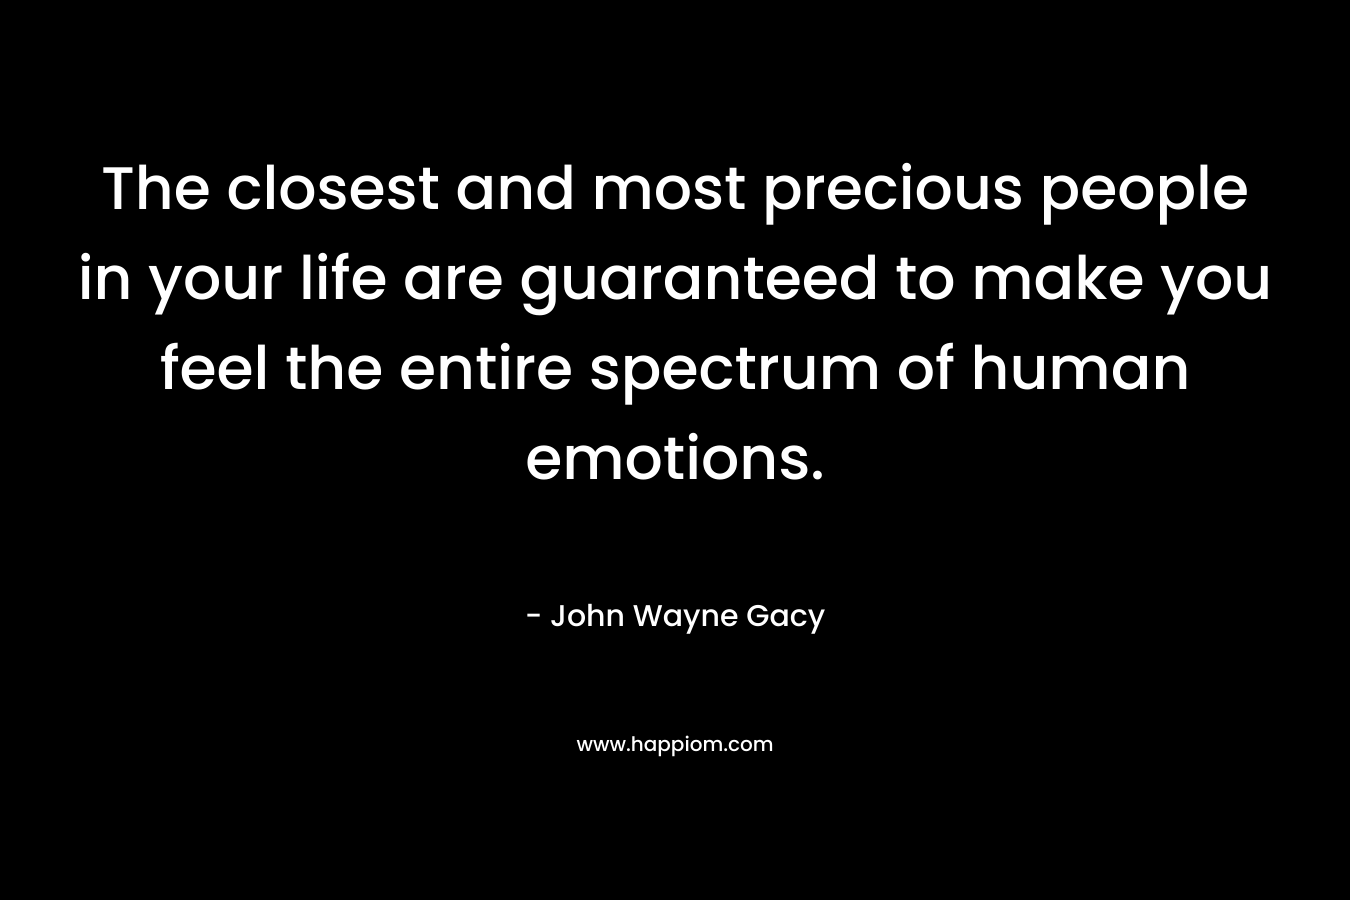 The closest and most precious people in your life are guaranteed to make you feel the entire spectrum of human emotions. – John Wayne Gacy